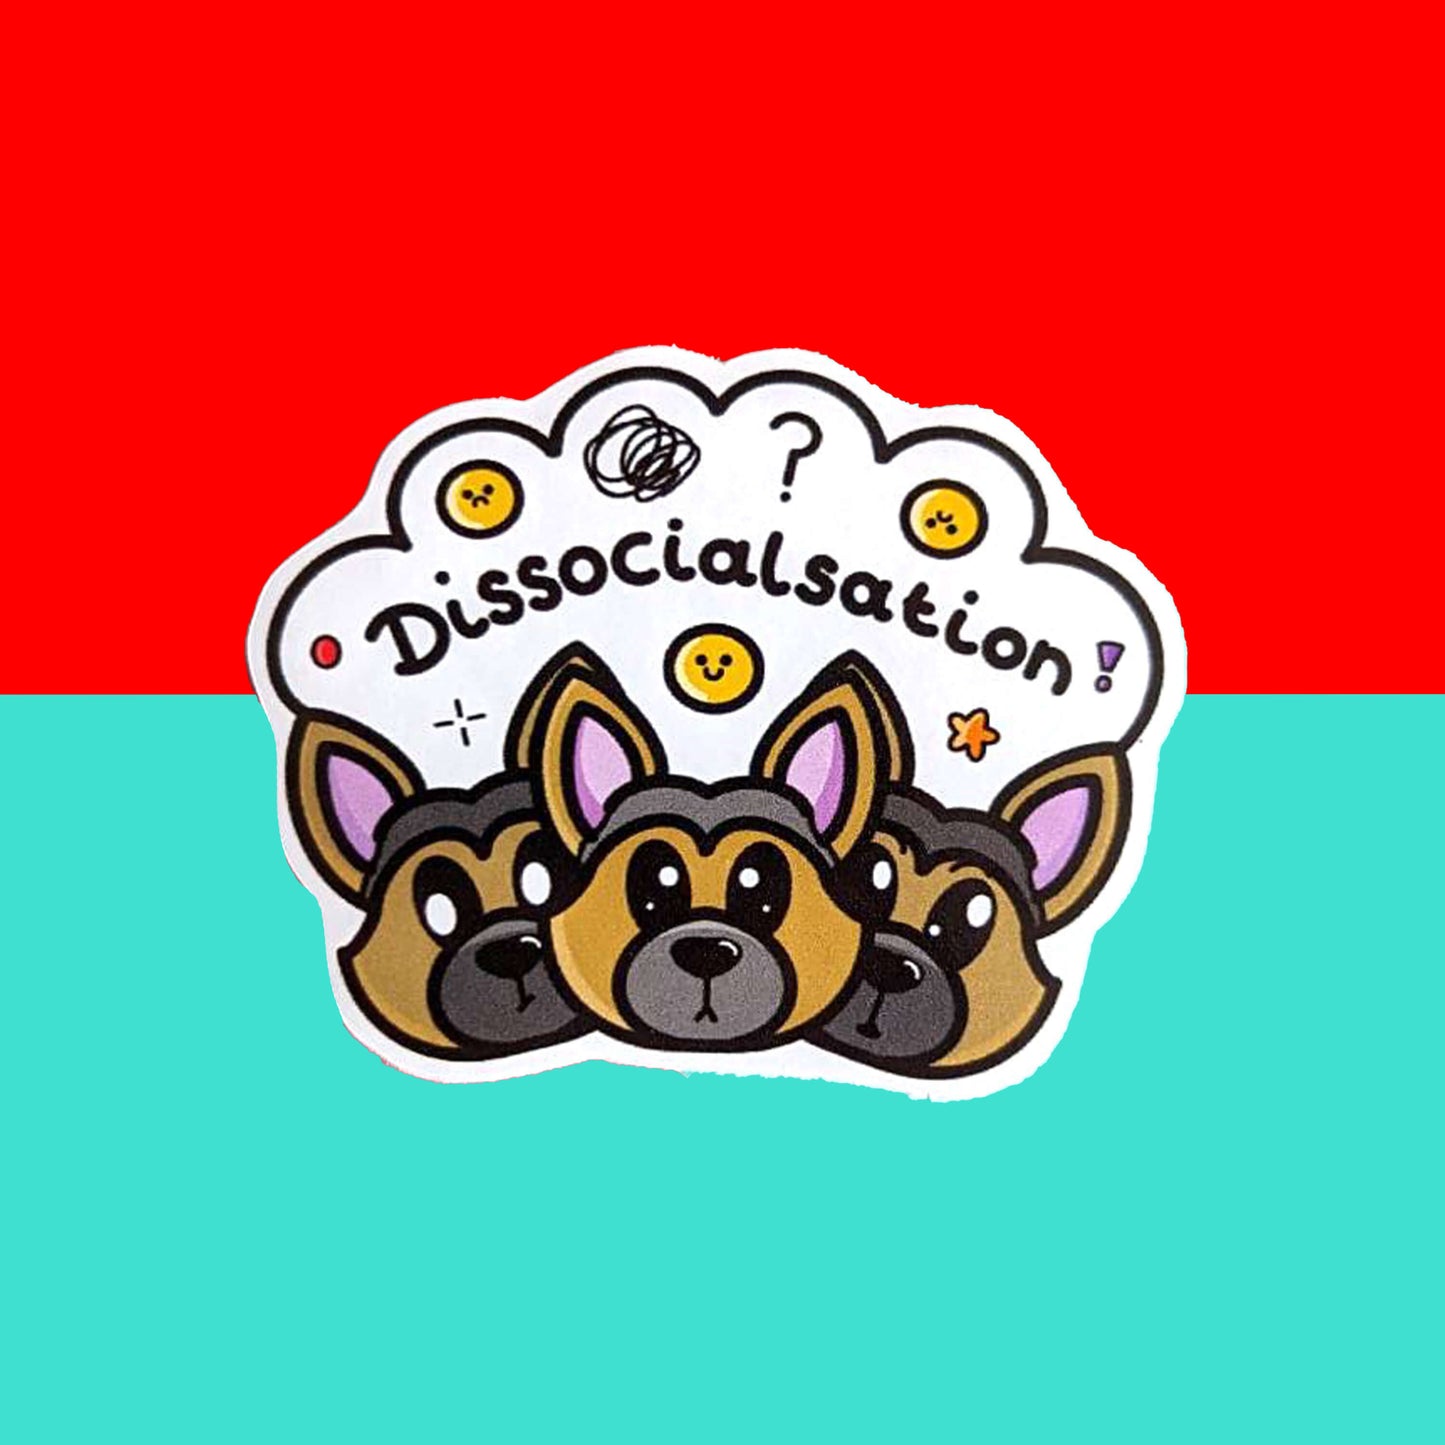 Dissocialsation Sticker - Dissociation being held on a blue and red background. Three confused brown and black Alsatian dog heads with their ears perked up, above them is a white cloud with sad and happy yellow faces, sparkles, question marks and black text reading 'dissocialsation!'. The design is raising awareness for dissociation.